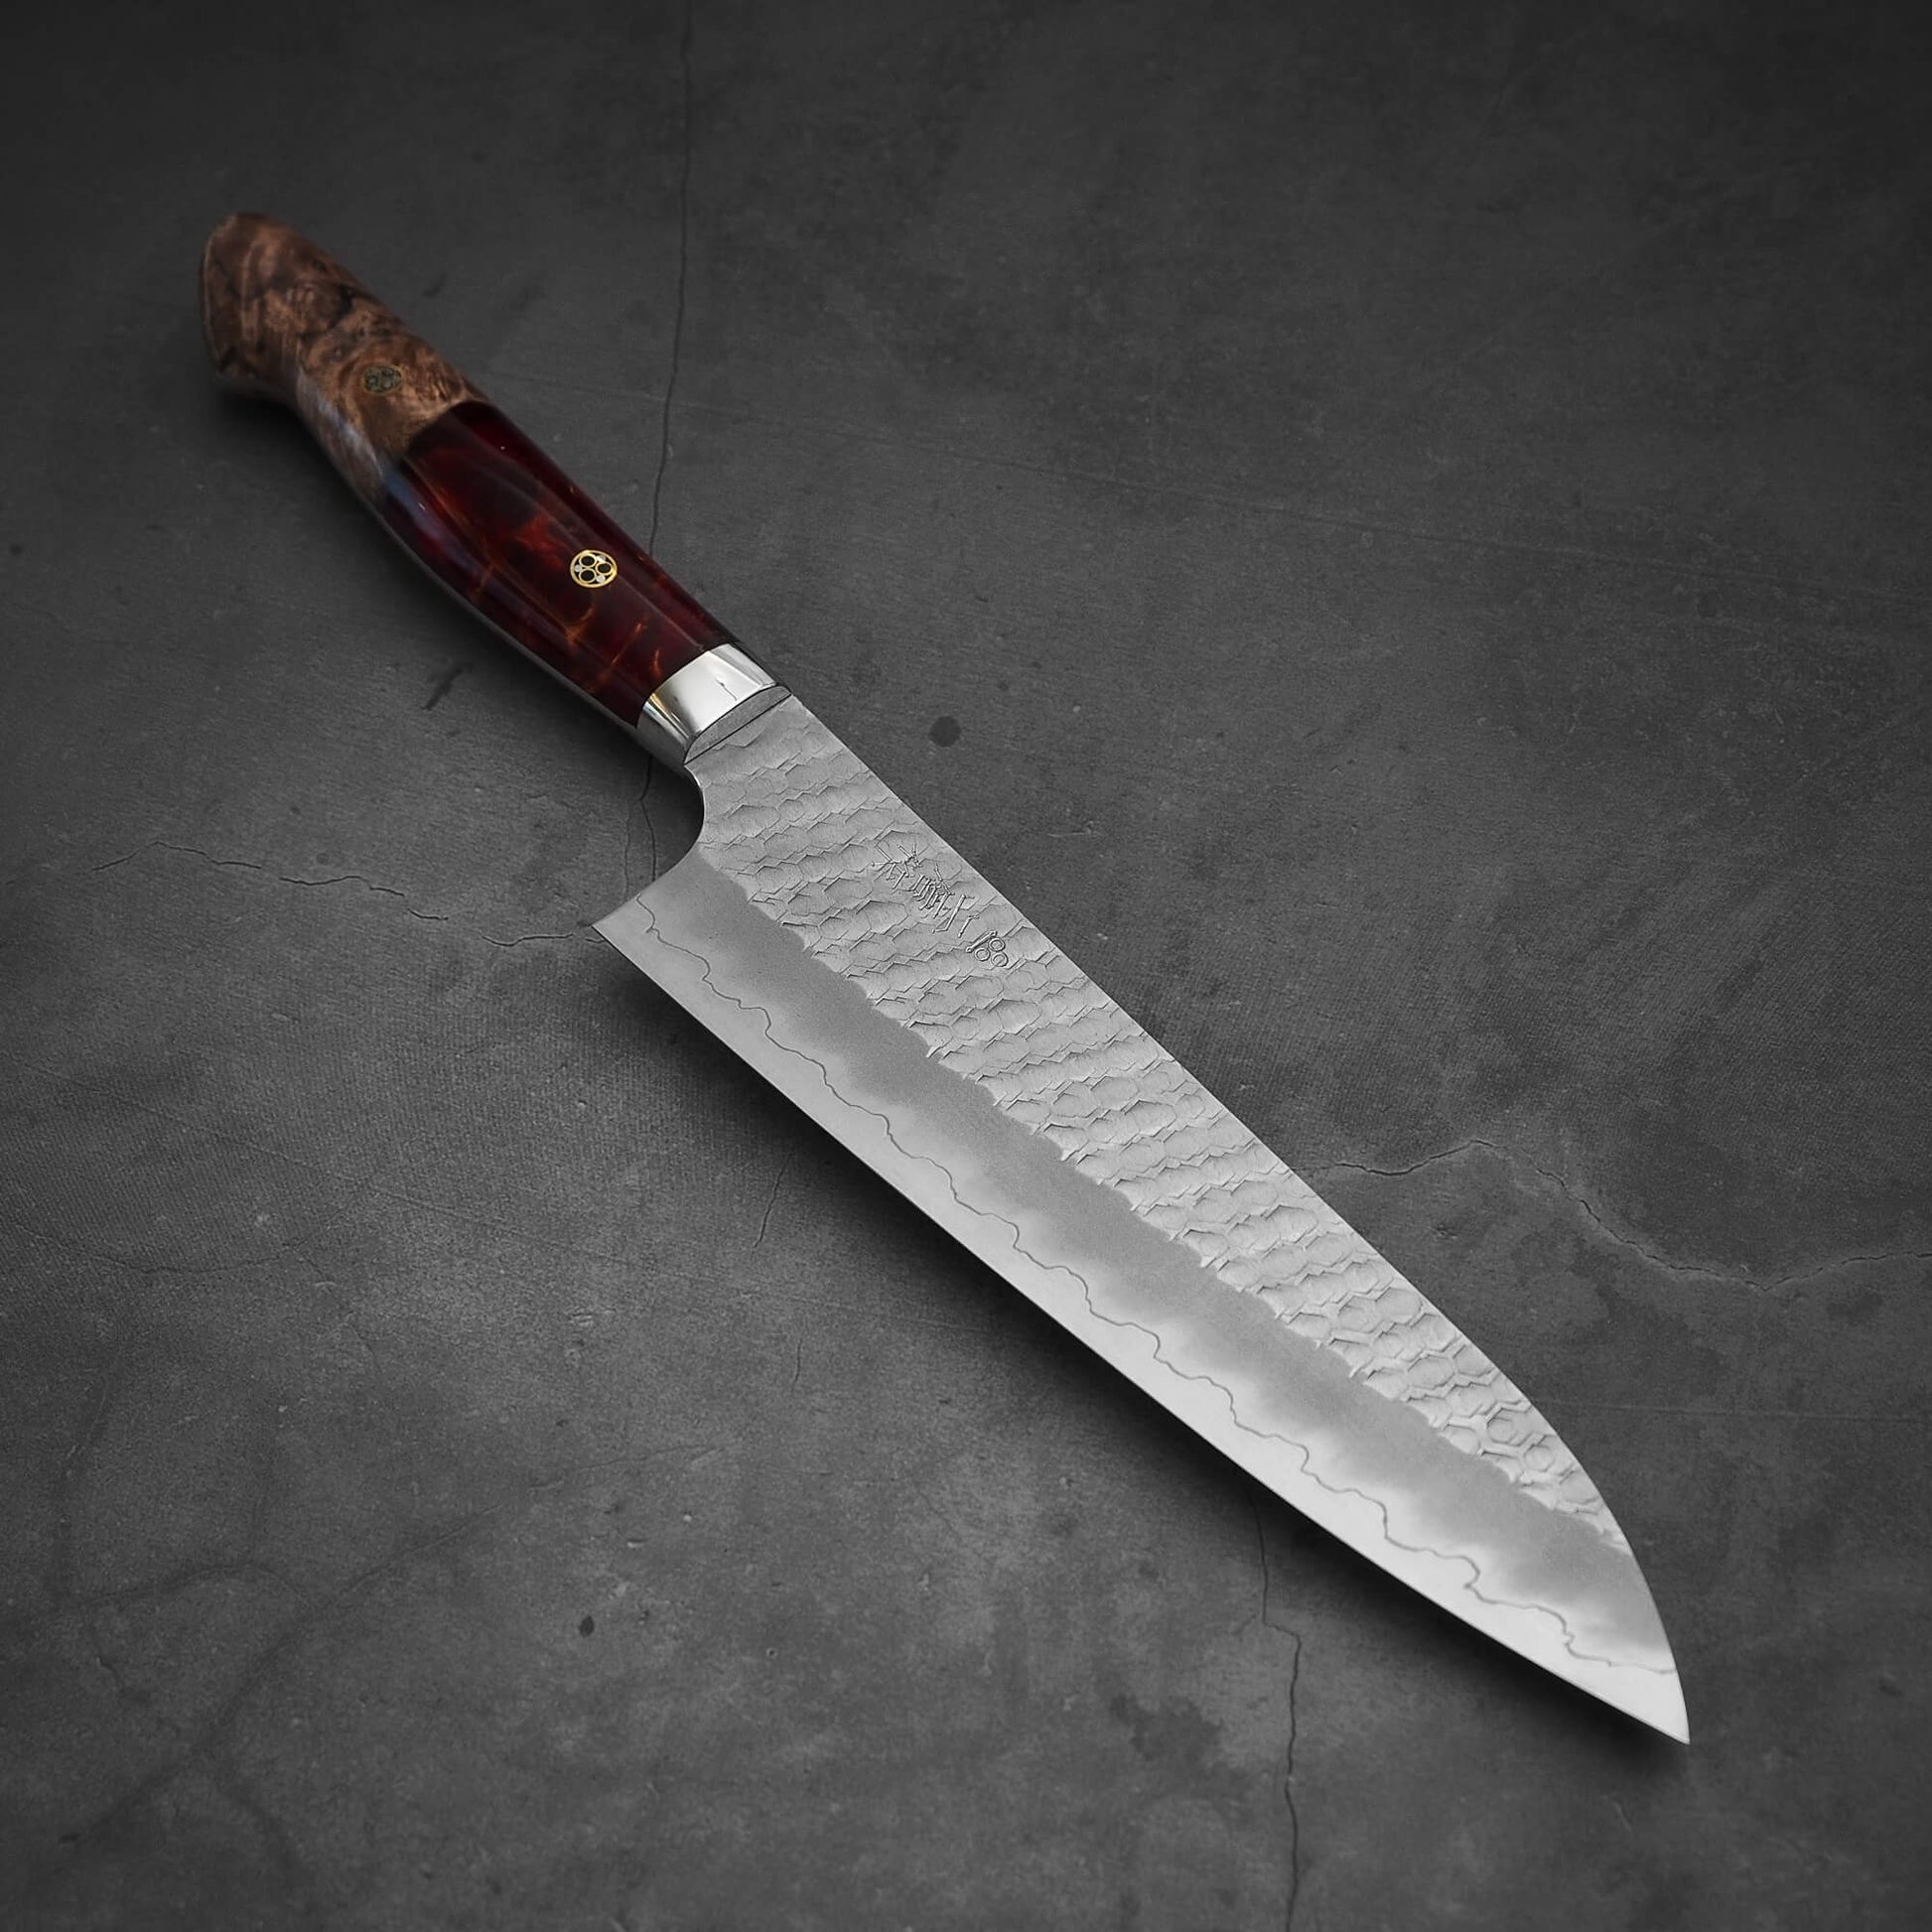 Top view of 210mm Nigara tsuchime SG2 gyuto knife with red handle in diagonal position where tip is pointing on bottom right